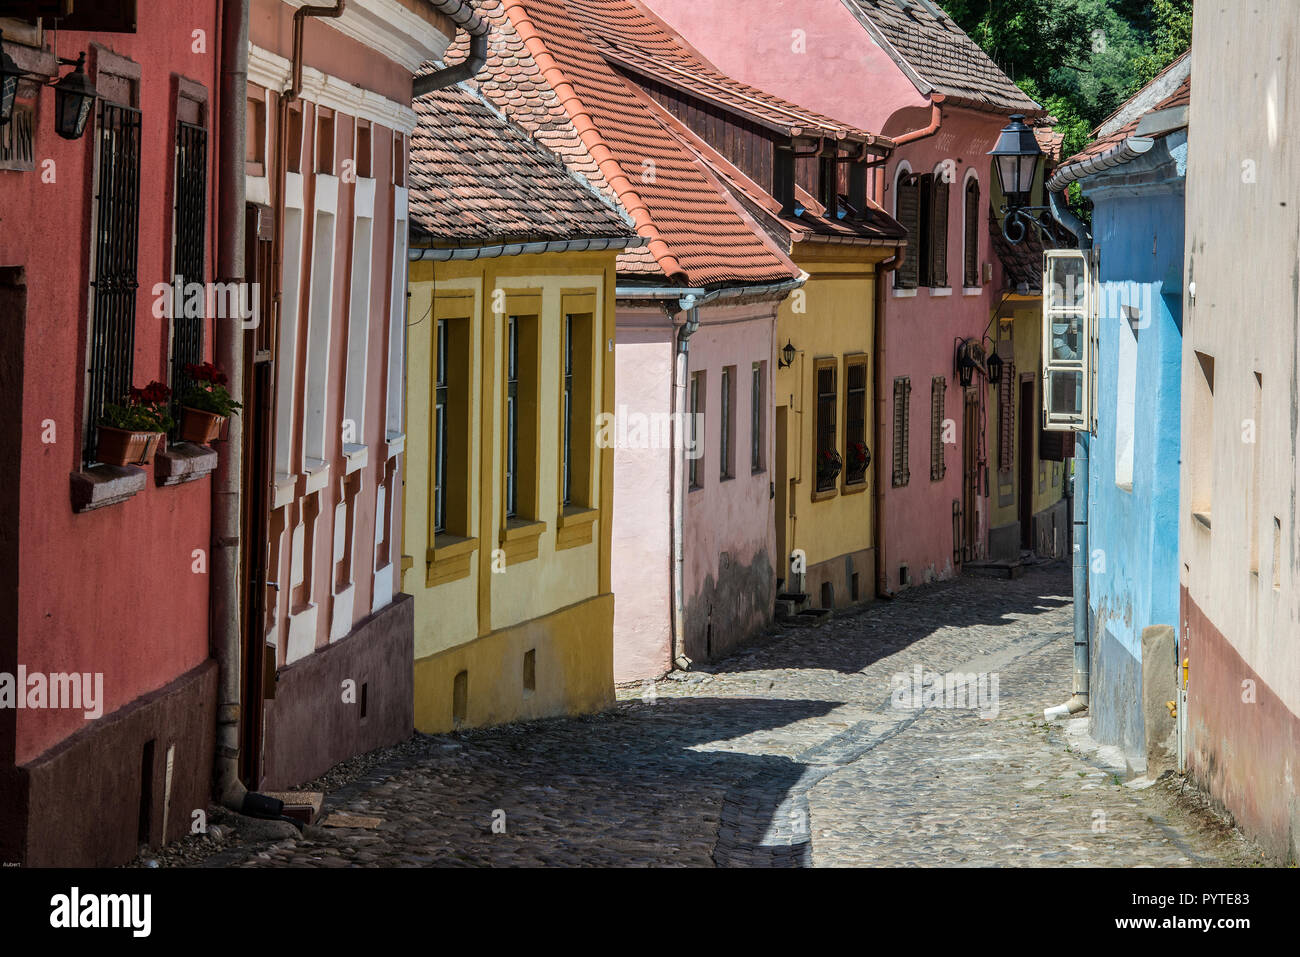 ROMANIA, SIGHISOARA.  Narrow cobblestone streets are typical for the old city center of Sighisoara, a UNESCO world heritage site Stock Photo